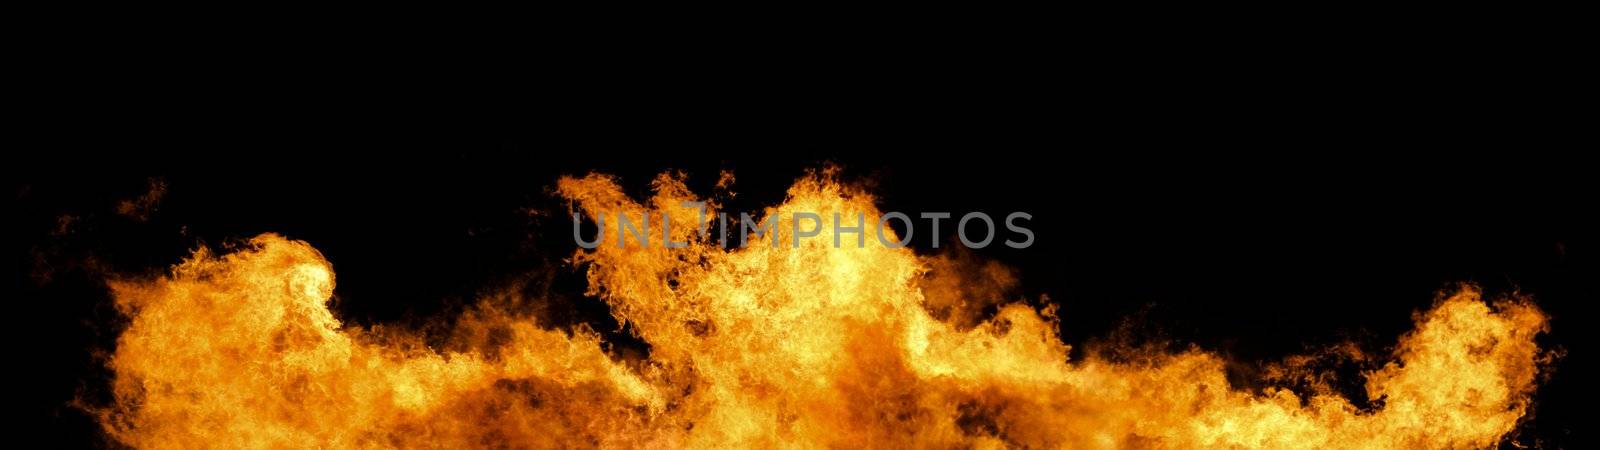 Massive wall of fire and flames on a black background (Huge XXL file)